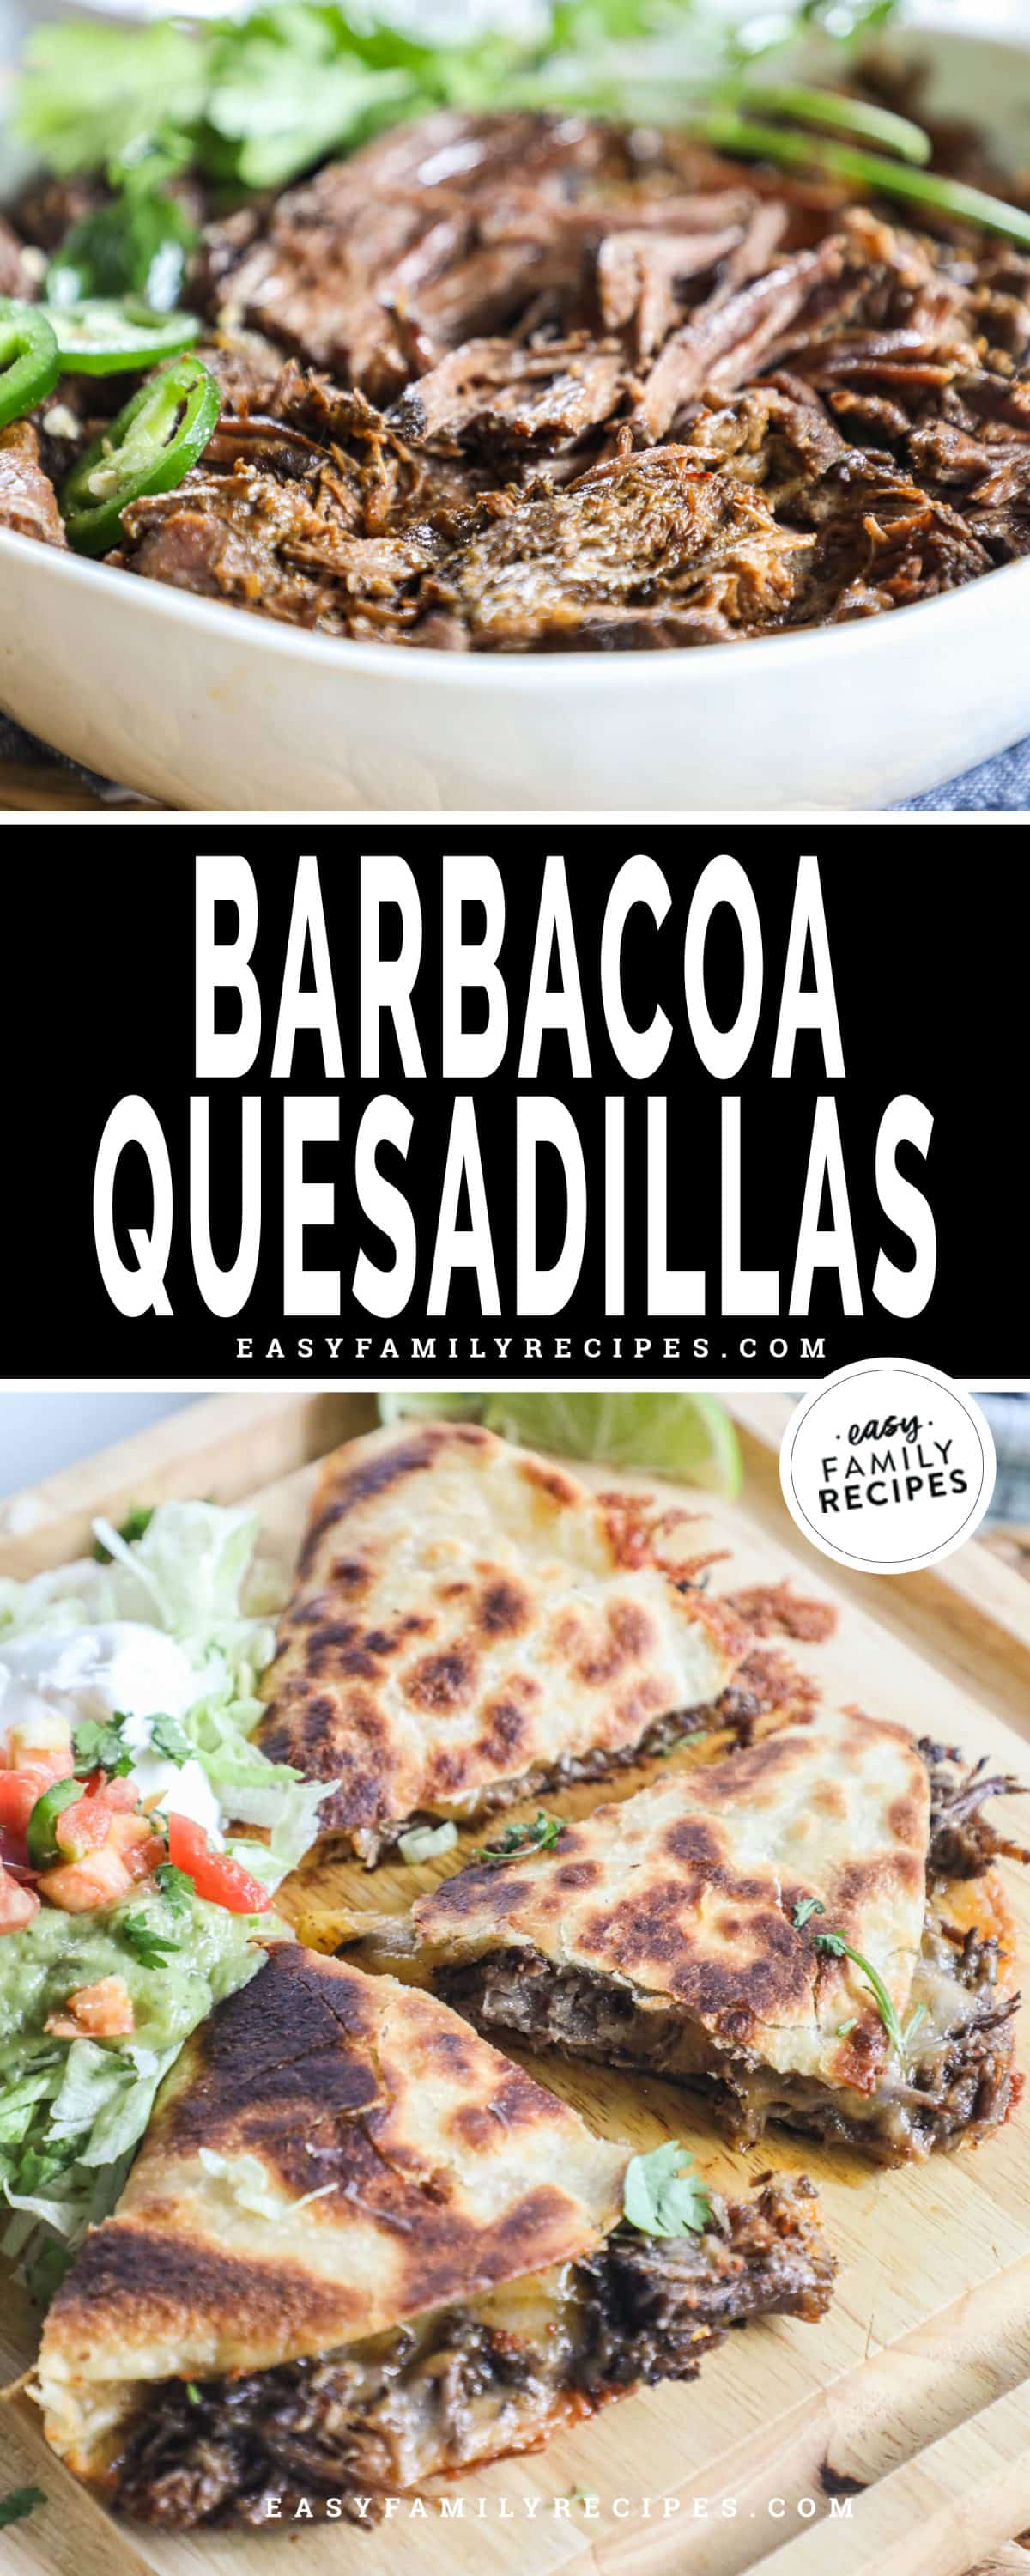 Barbacoa quesadilla that is golden brown and topped with guacamole, pico, and shredded lettuce and another image of the barbacoa beef in a bowl.